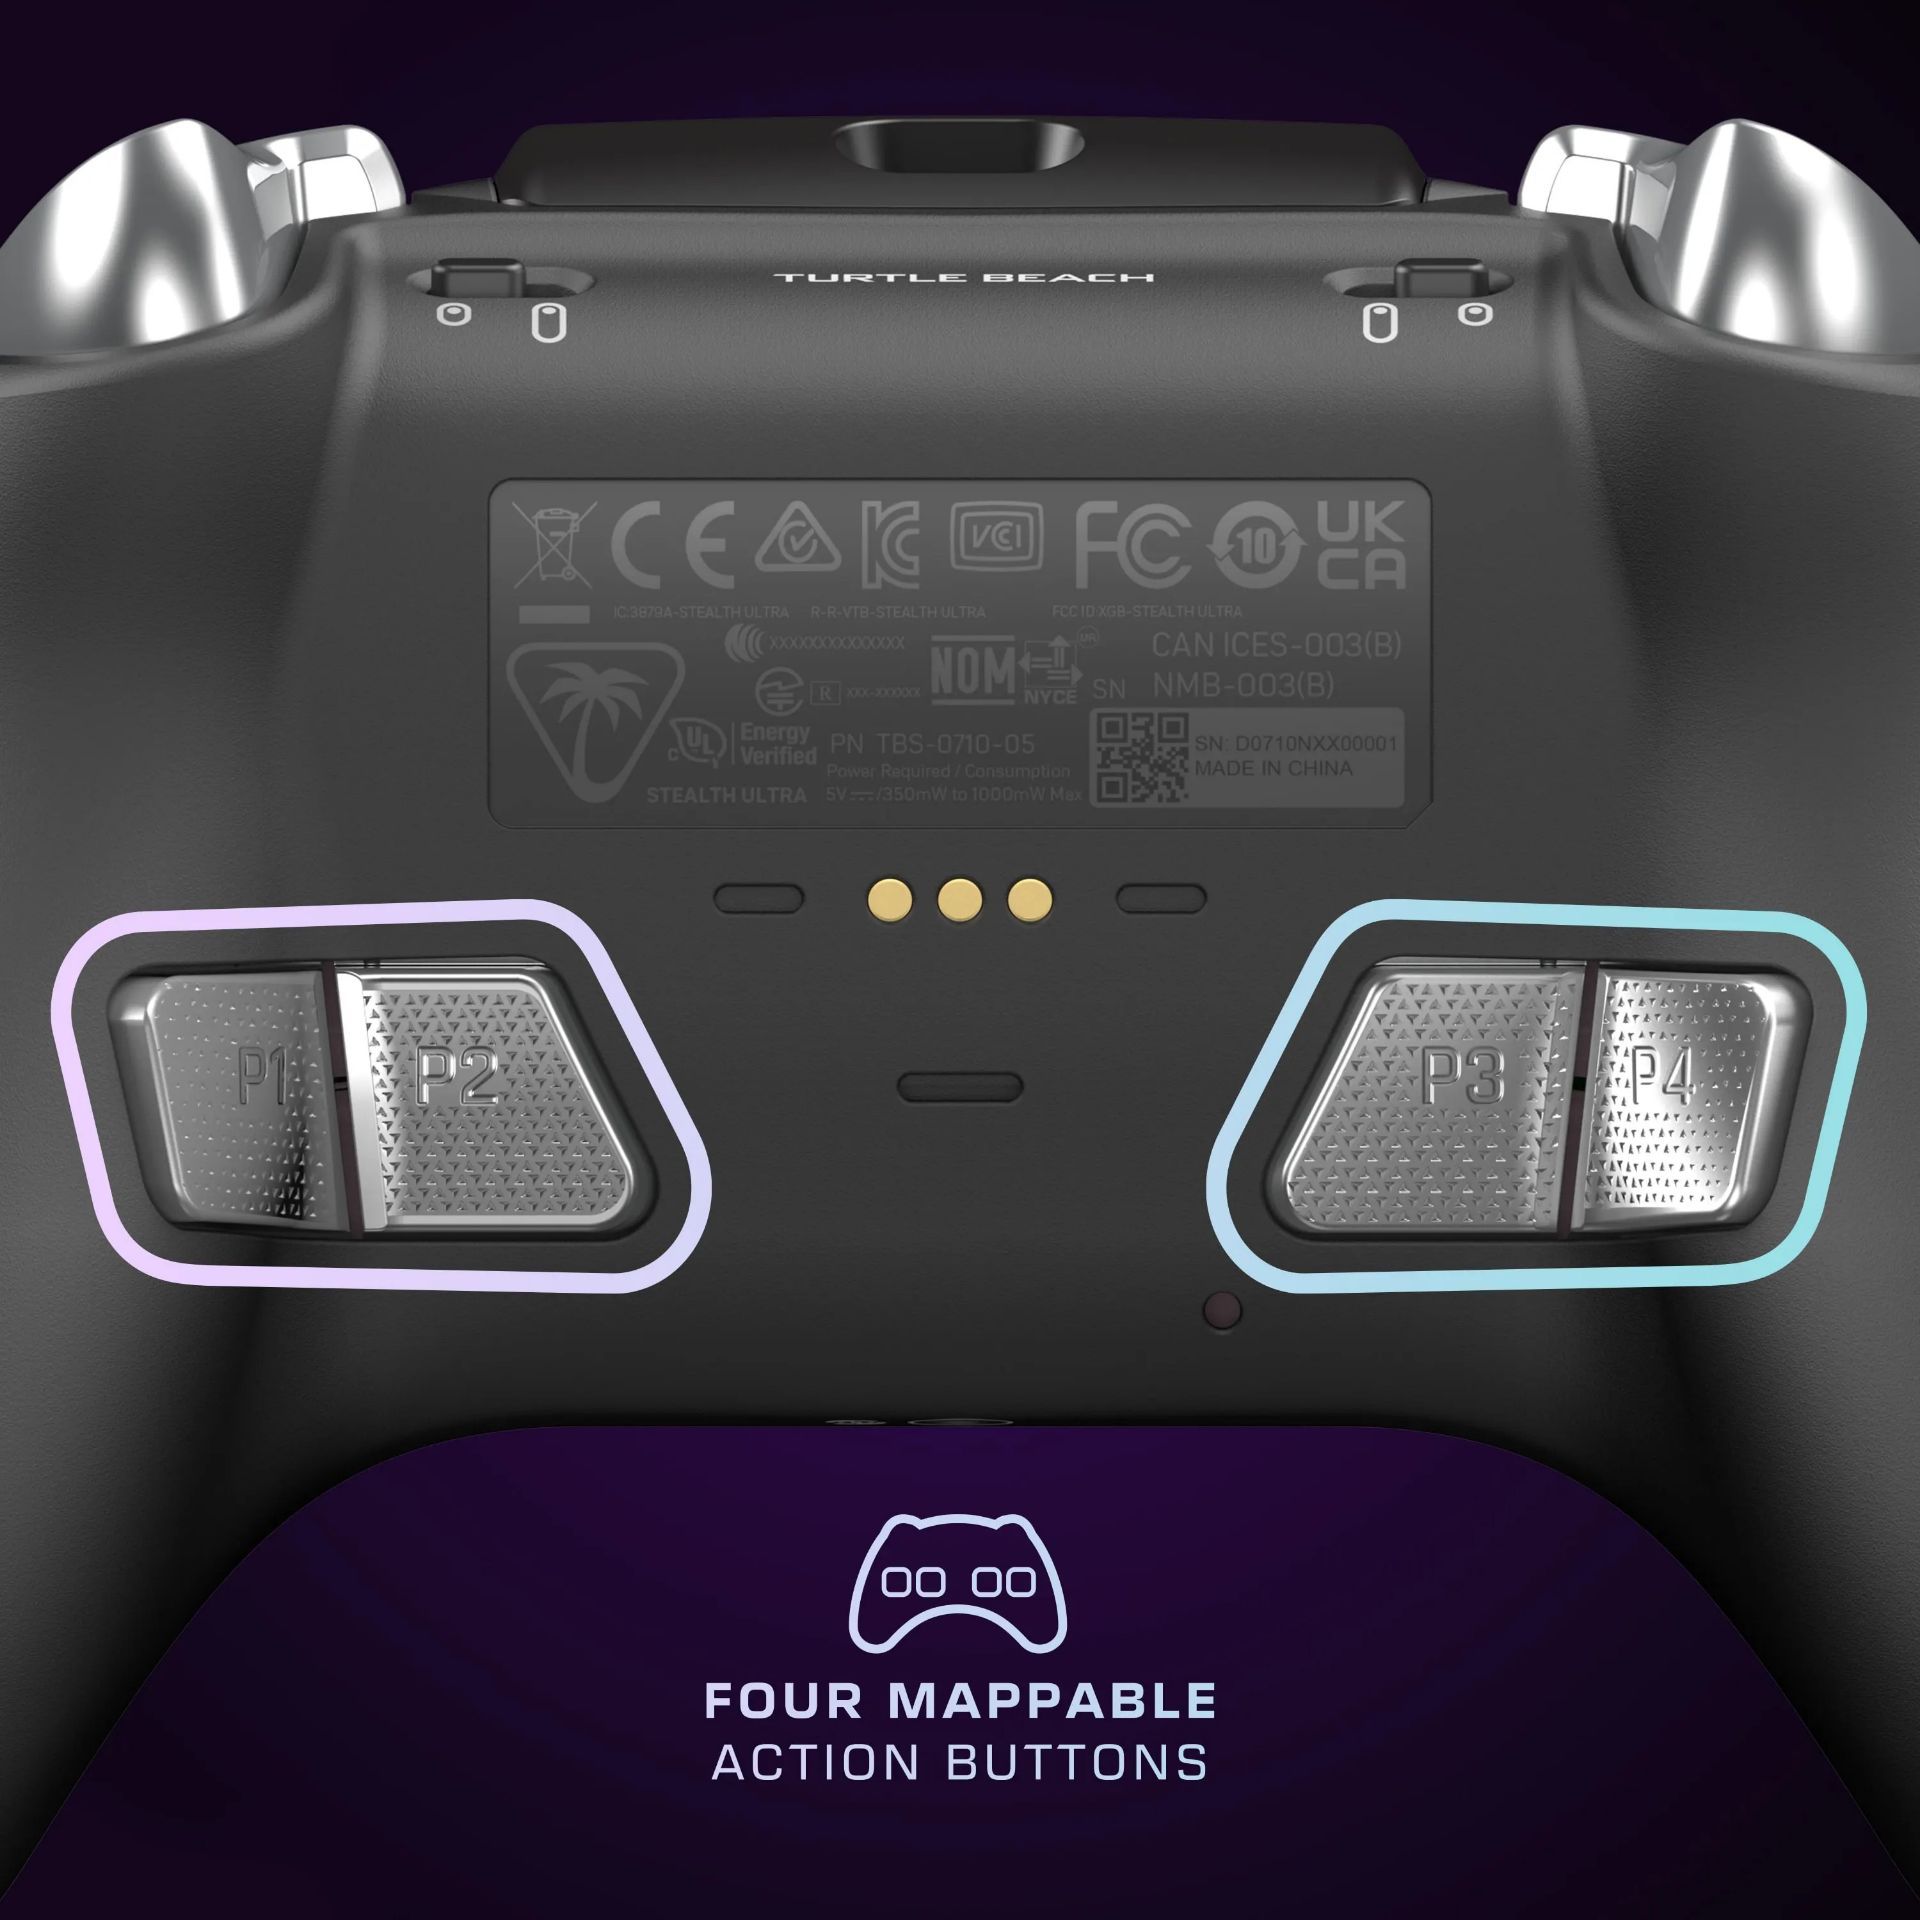 Turtle-Beach-Stealth-Ultra-Controller-Detail-Image-8-Four-Mappable-Quick-Action-Buttons_v2.jpeg (1920×1920)